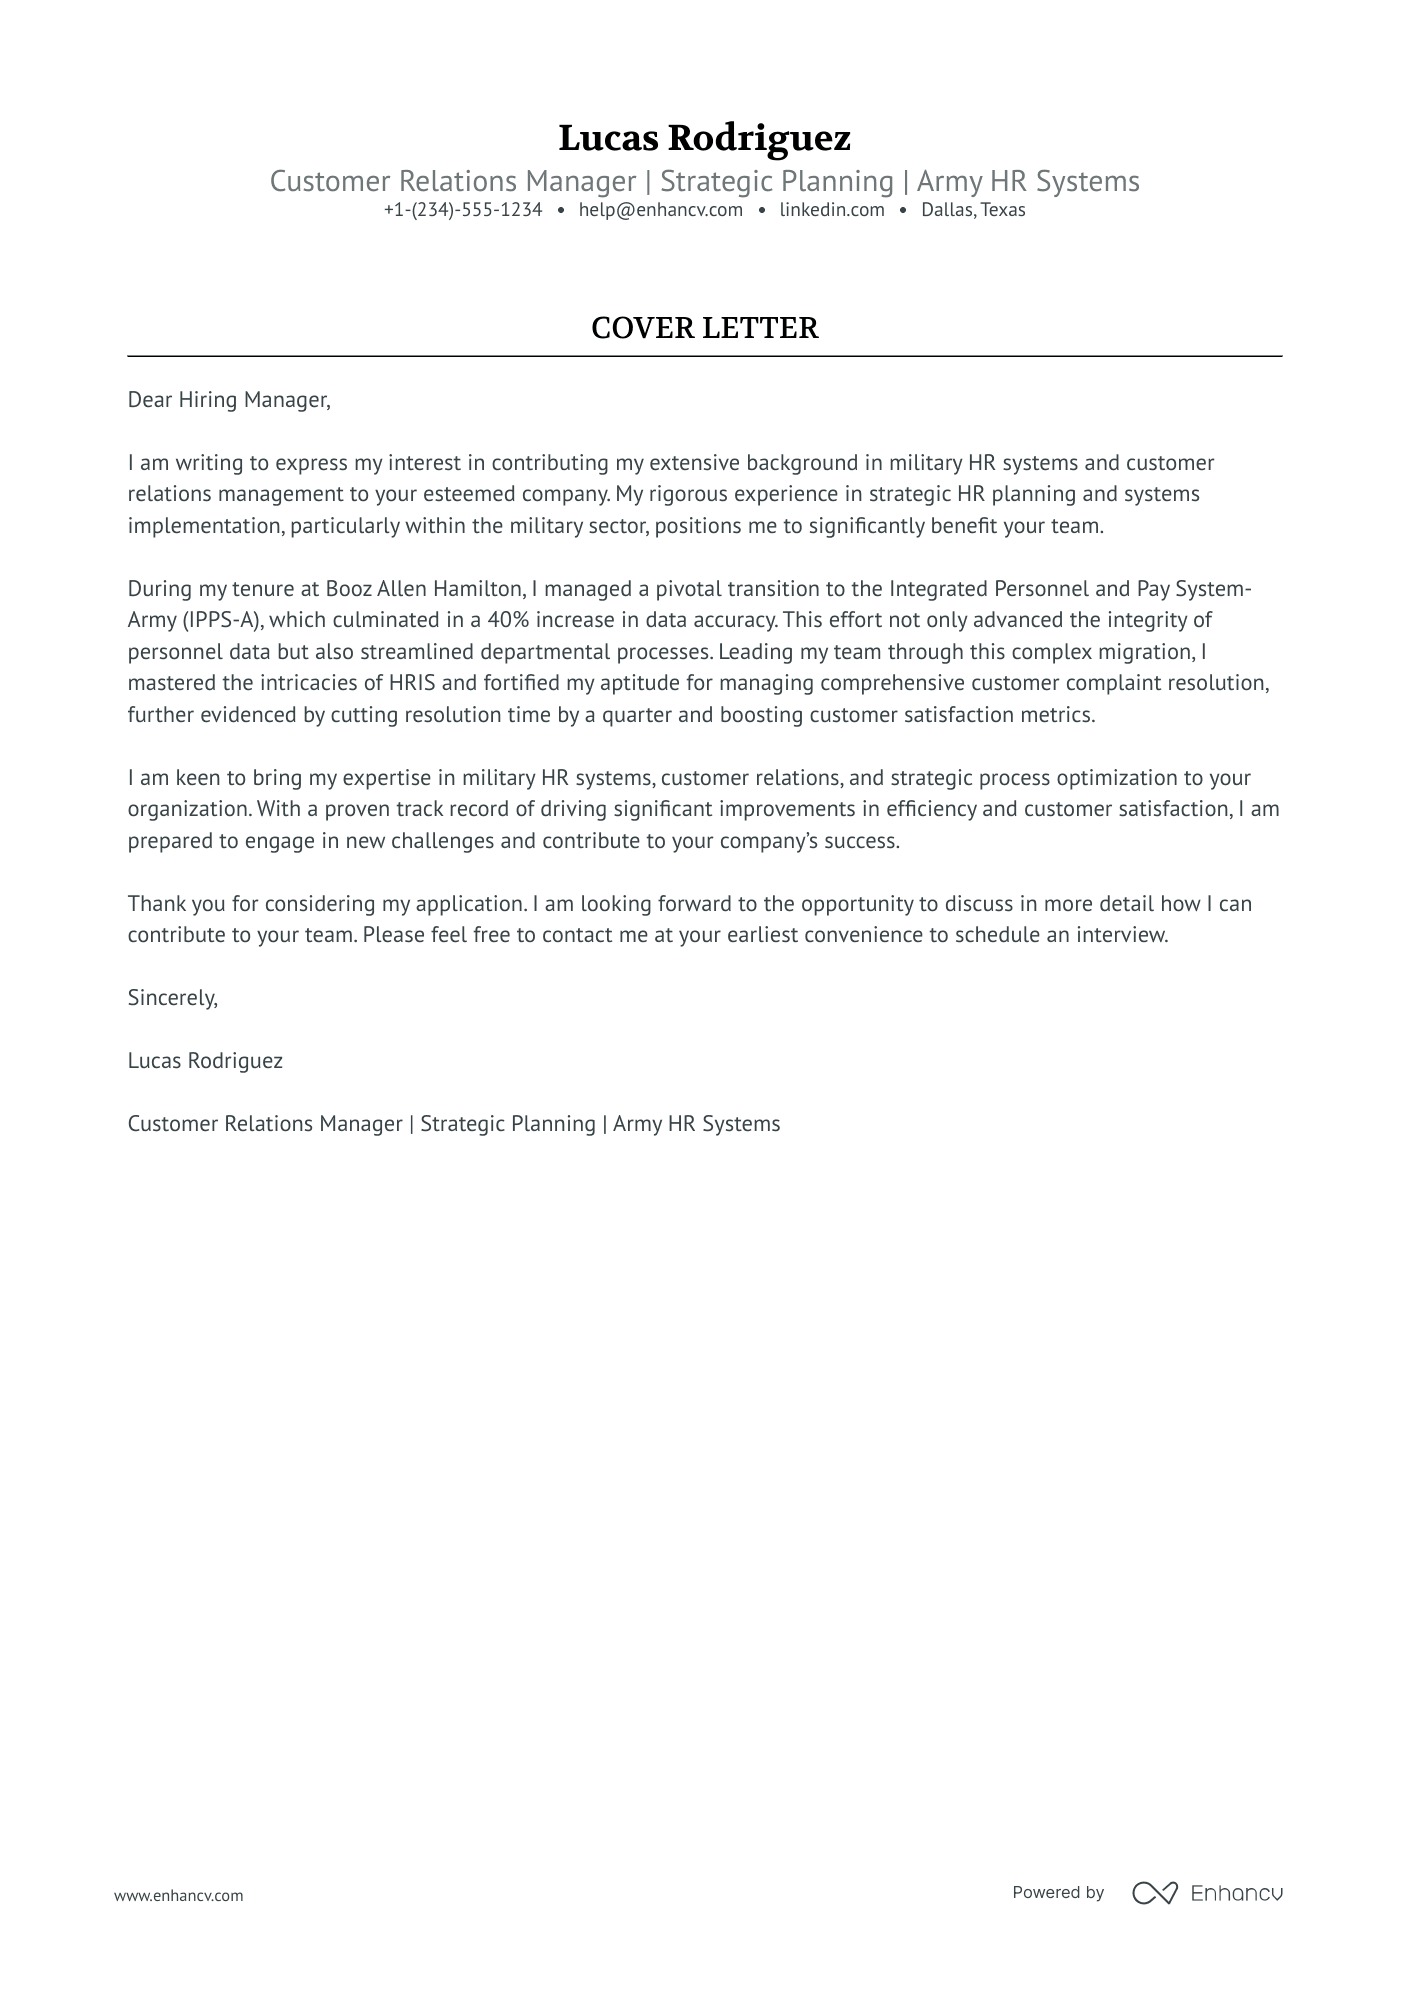 cover letter for remote customer service example